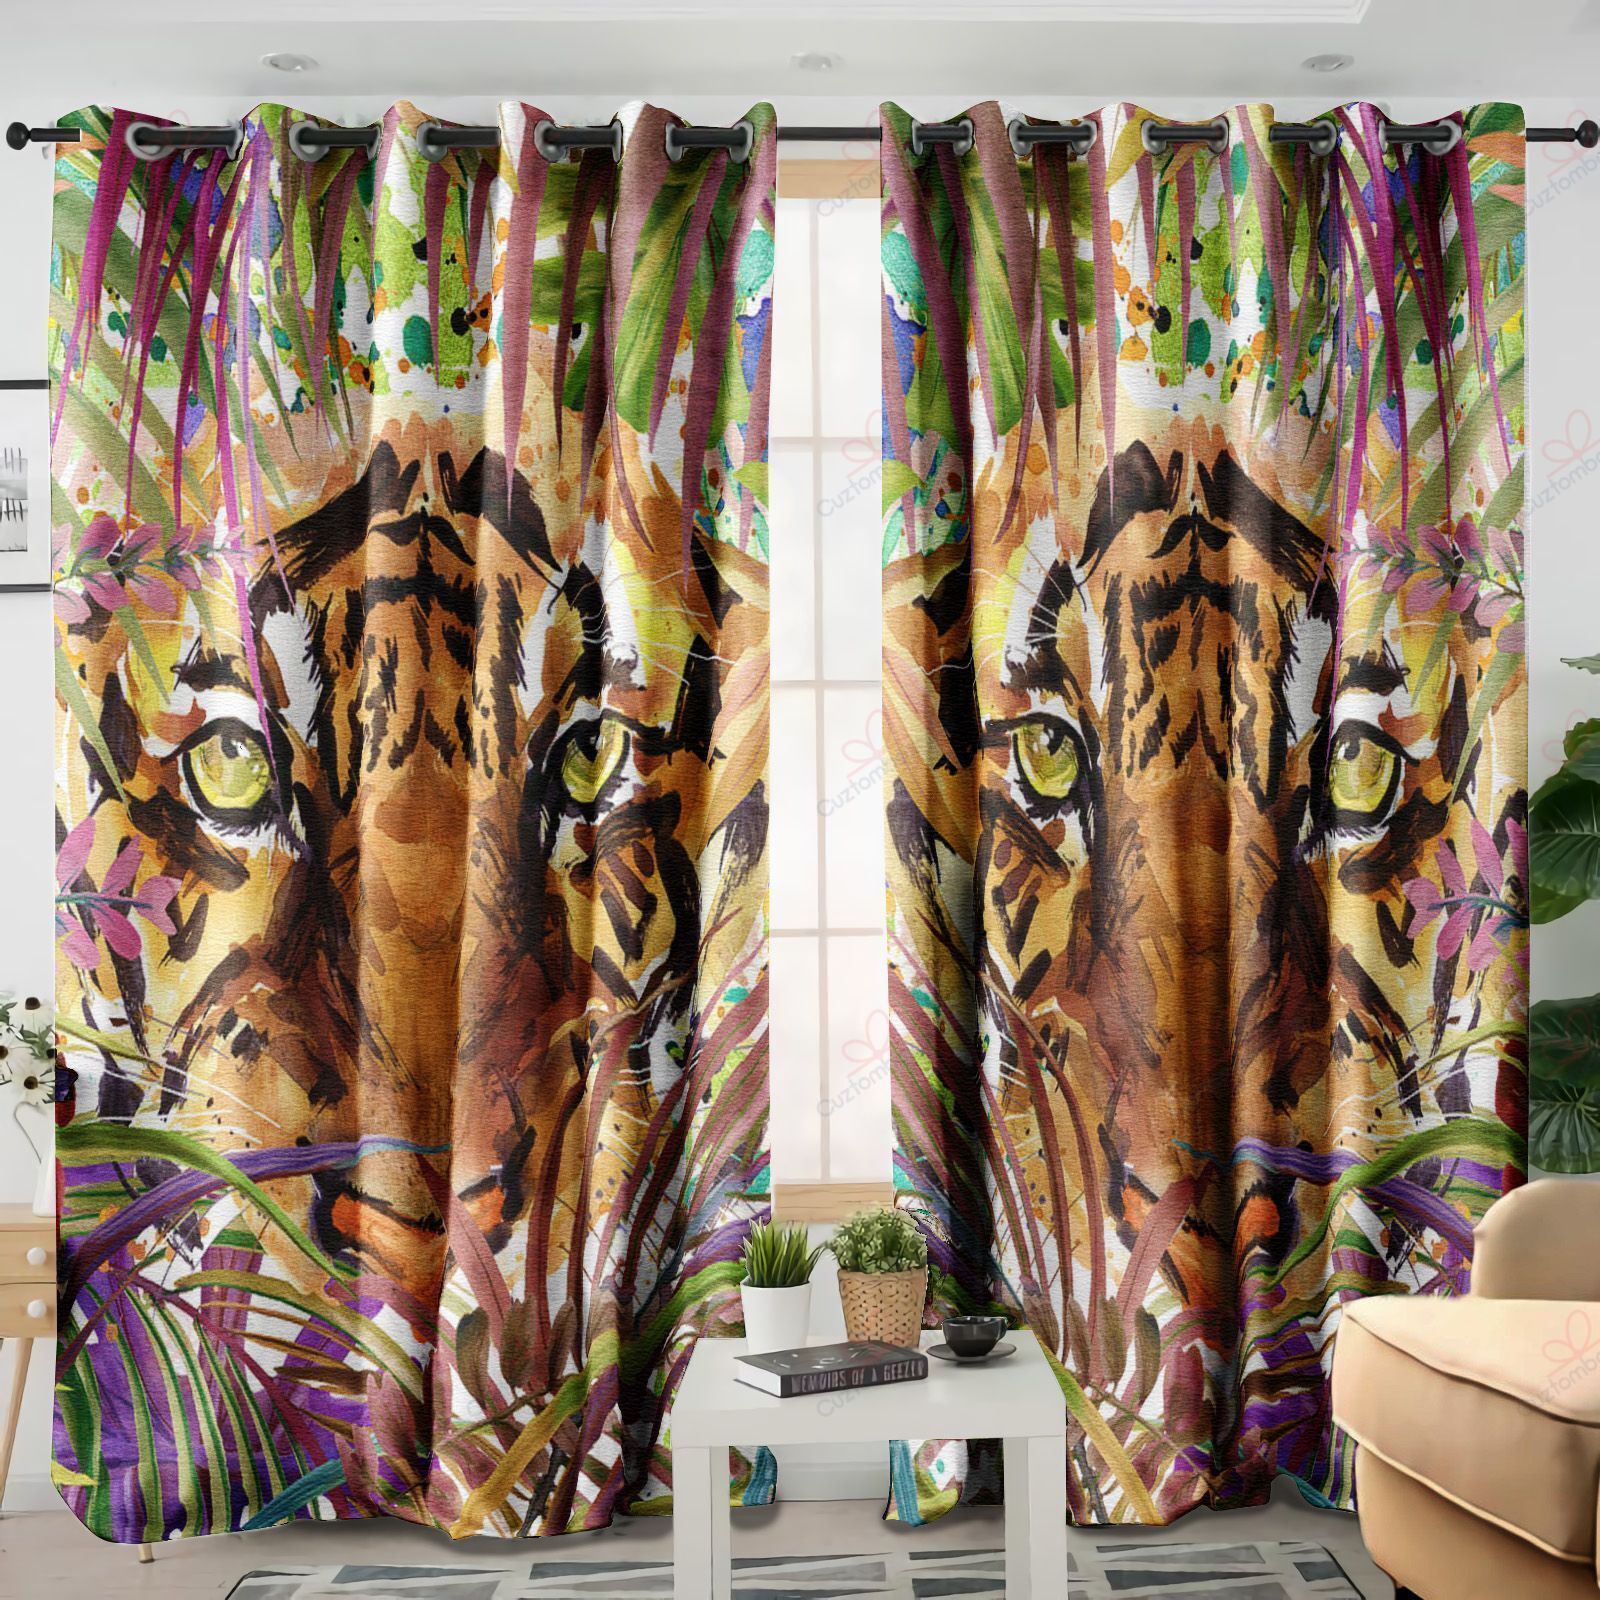 Tiger Printed Window Curtains Home Decor